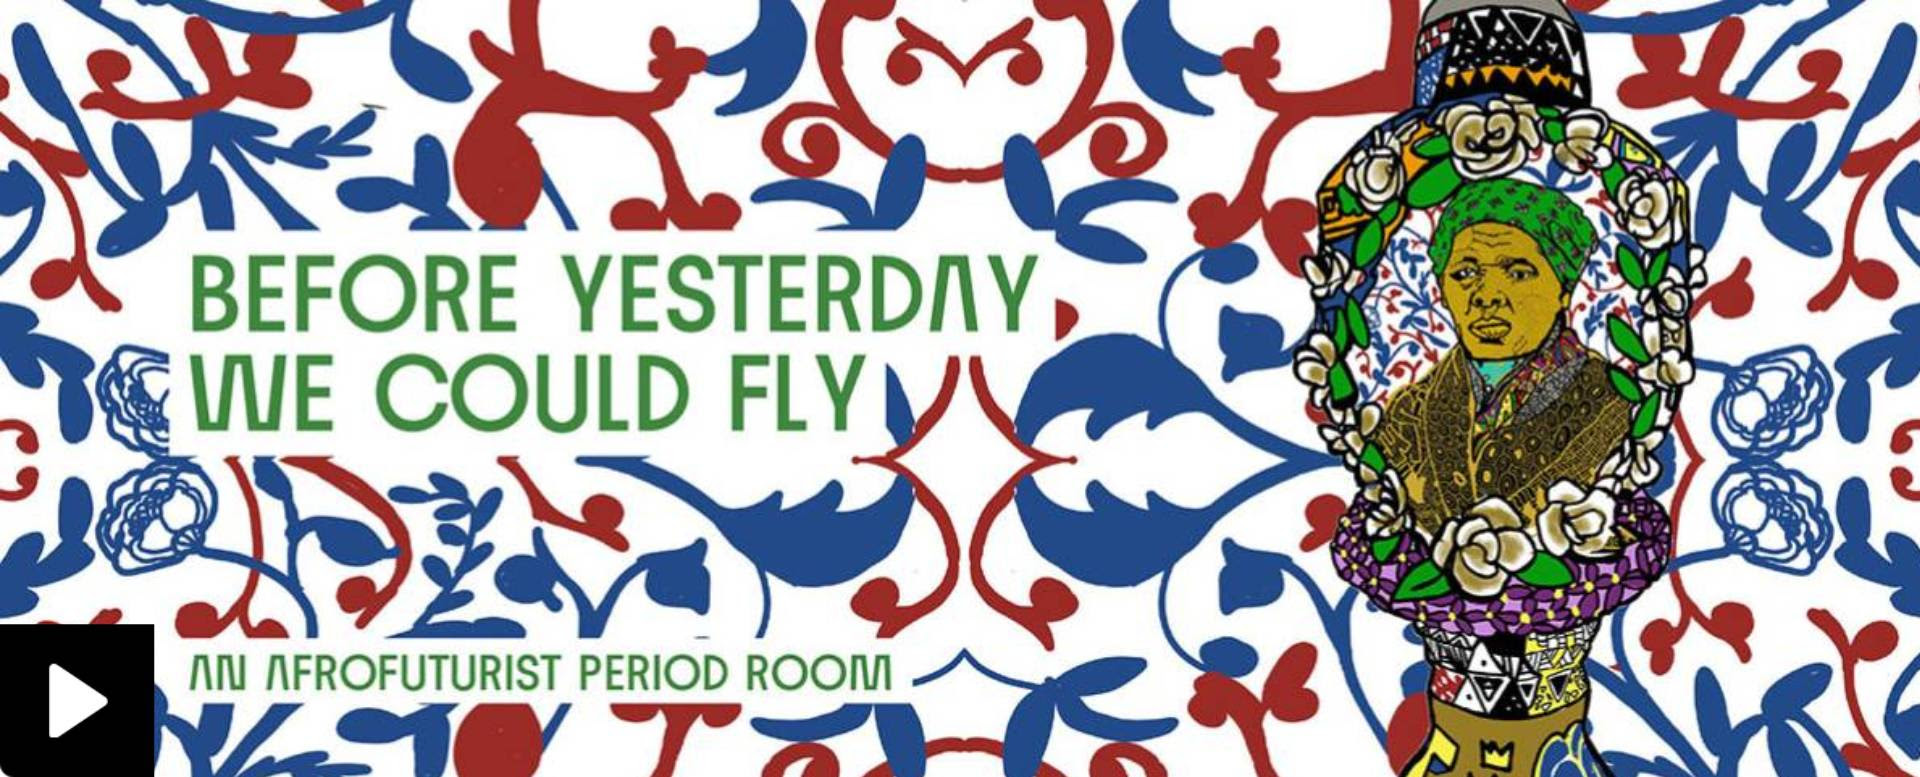 Decorative red and blue digtal illustratrion | Before Yesterday We Could Fly: An Afrofuturist Period Room.